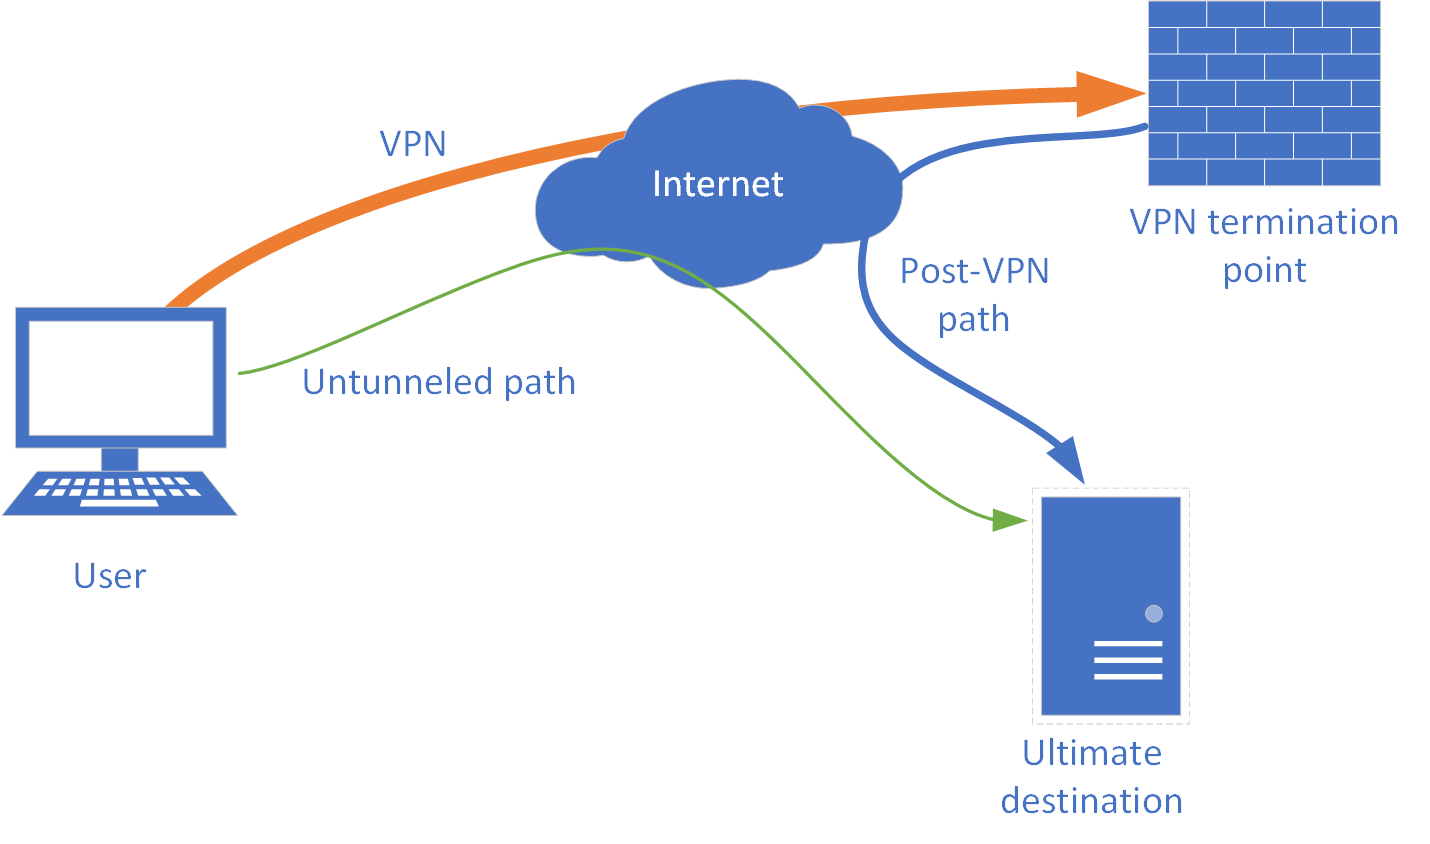 Are VPN tunnels legal?